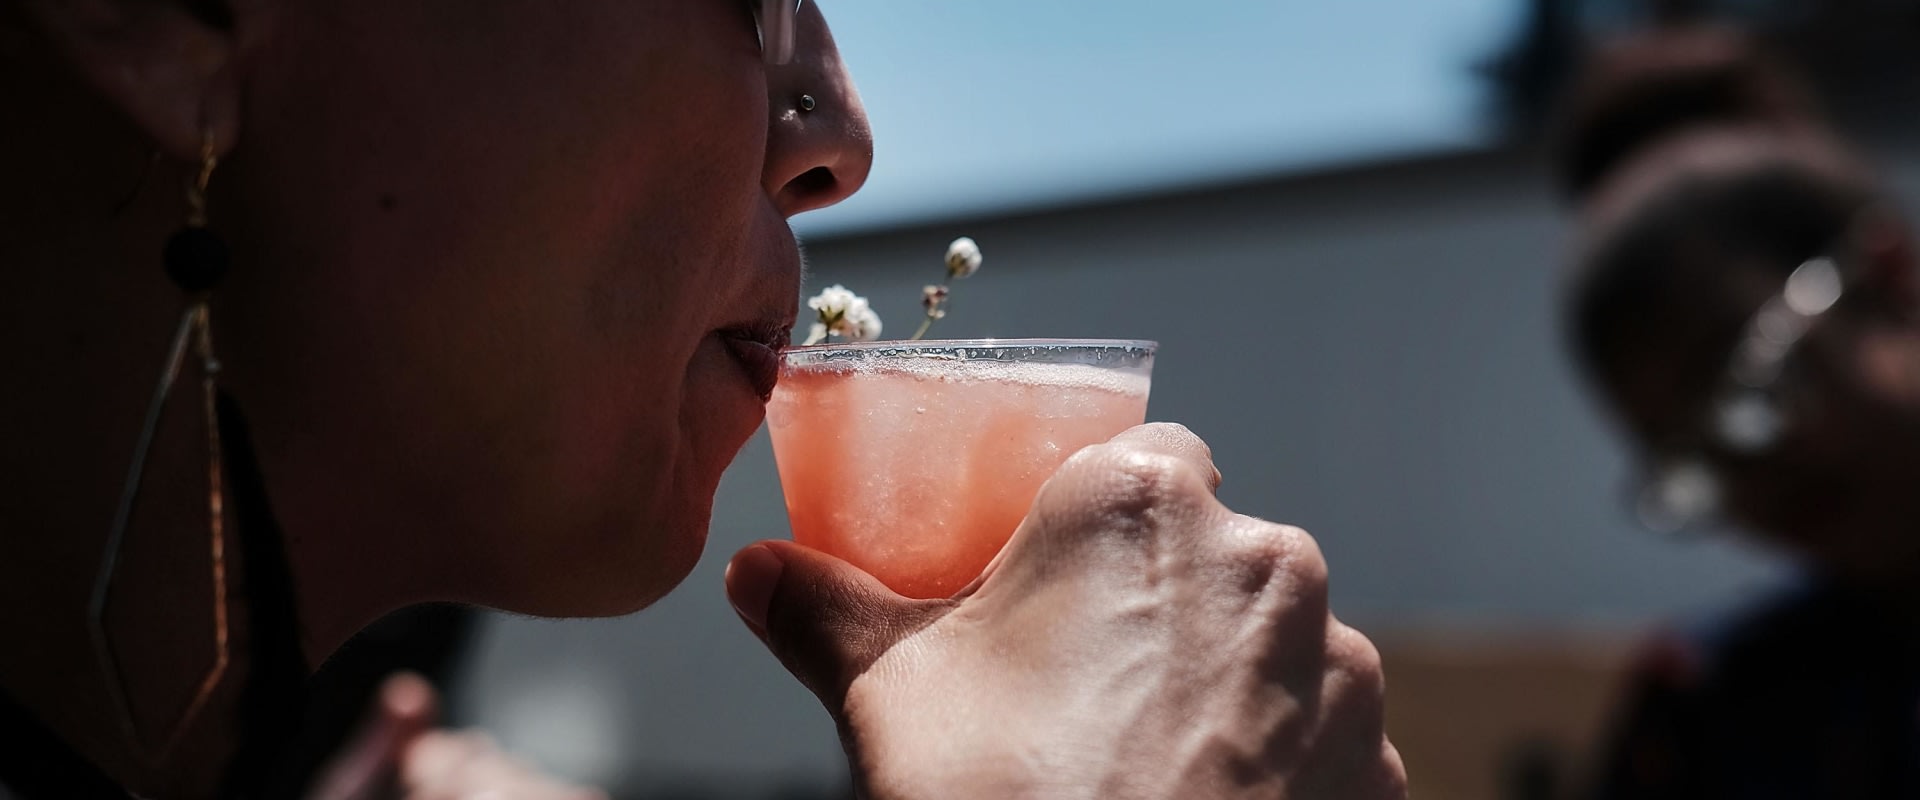 How long after drinking does your body heal?